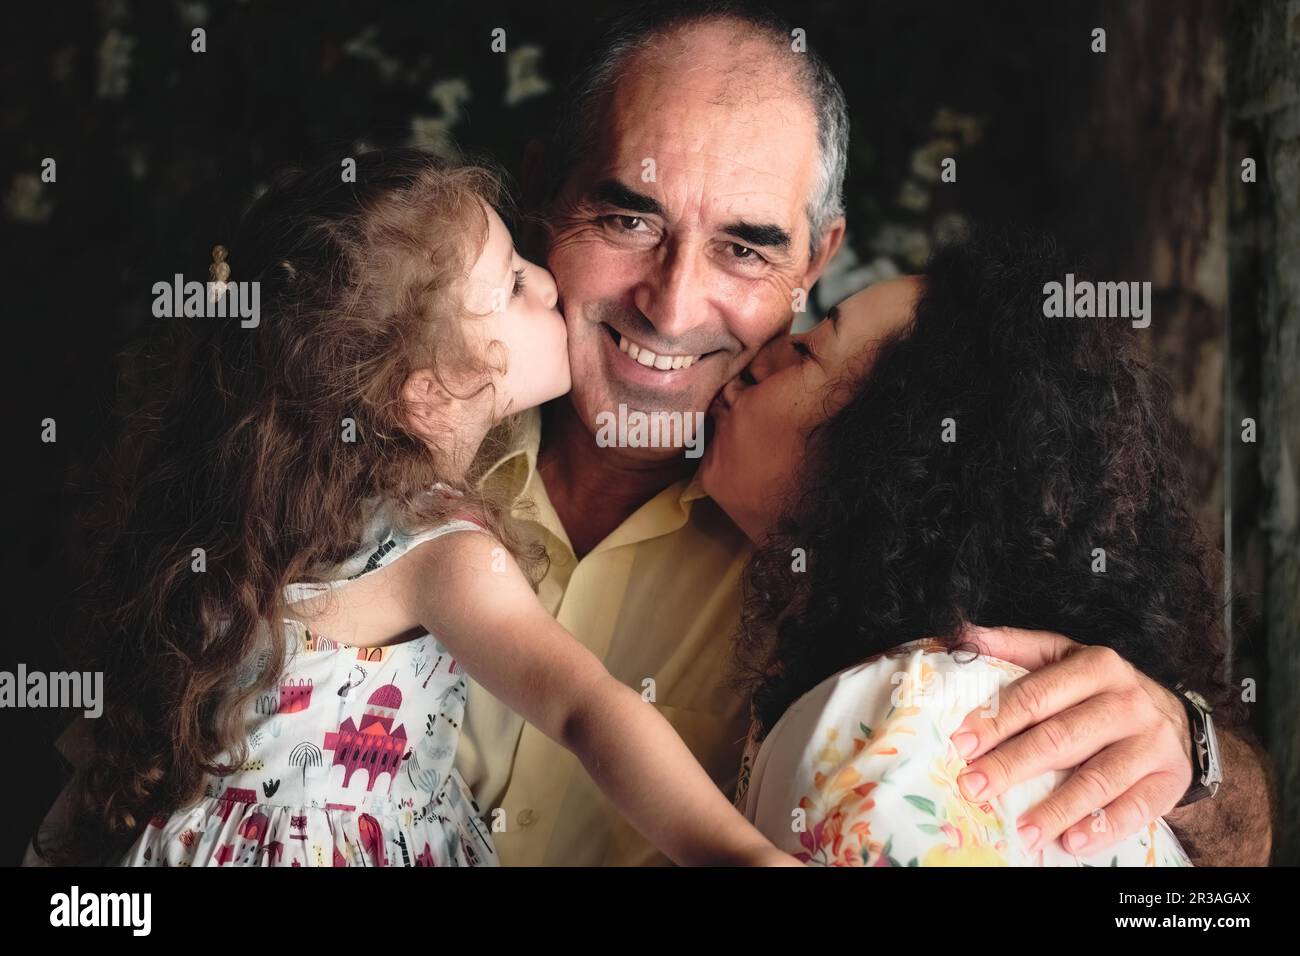 3 generations lifestyle portrait shot - a woman and her daughter kissing the father / grandfather looking at the camera - white Caucasian family celeb Stock Photo